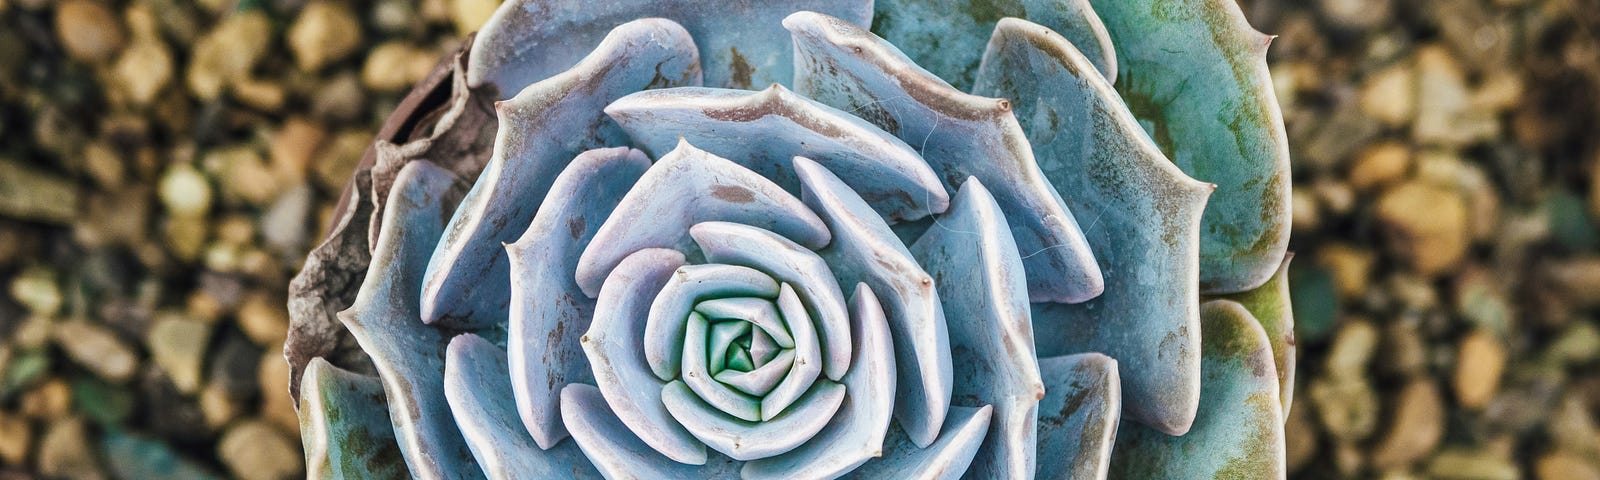 An image of a light blue-gray/green rose flower with thick pointed petals.